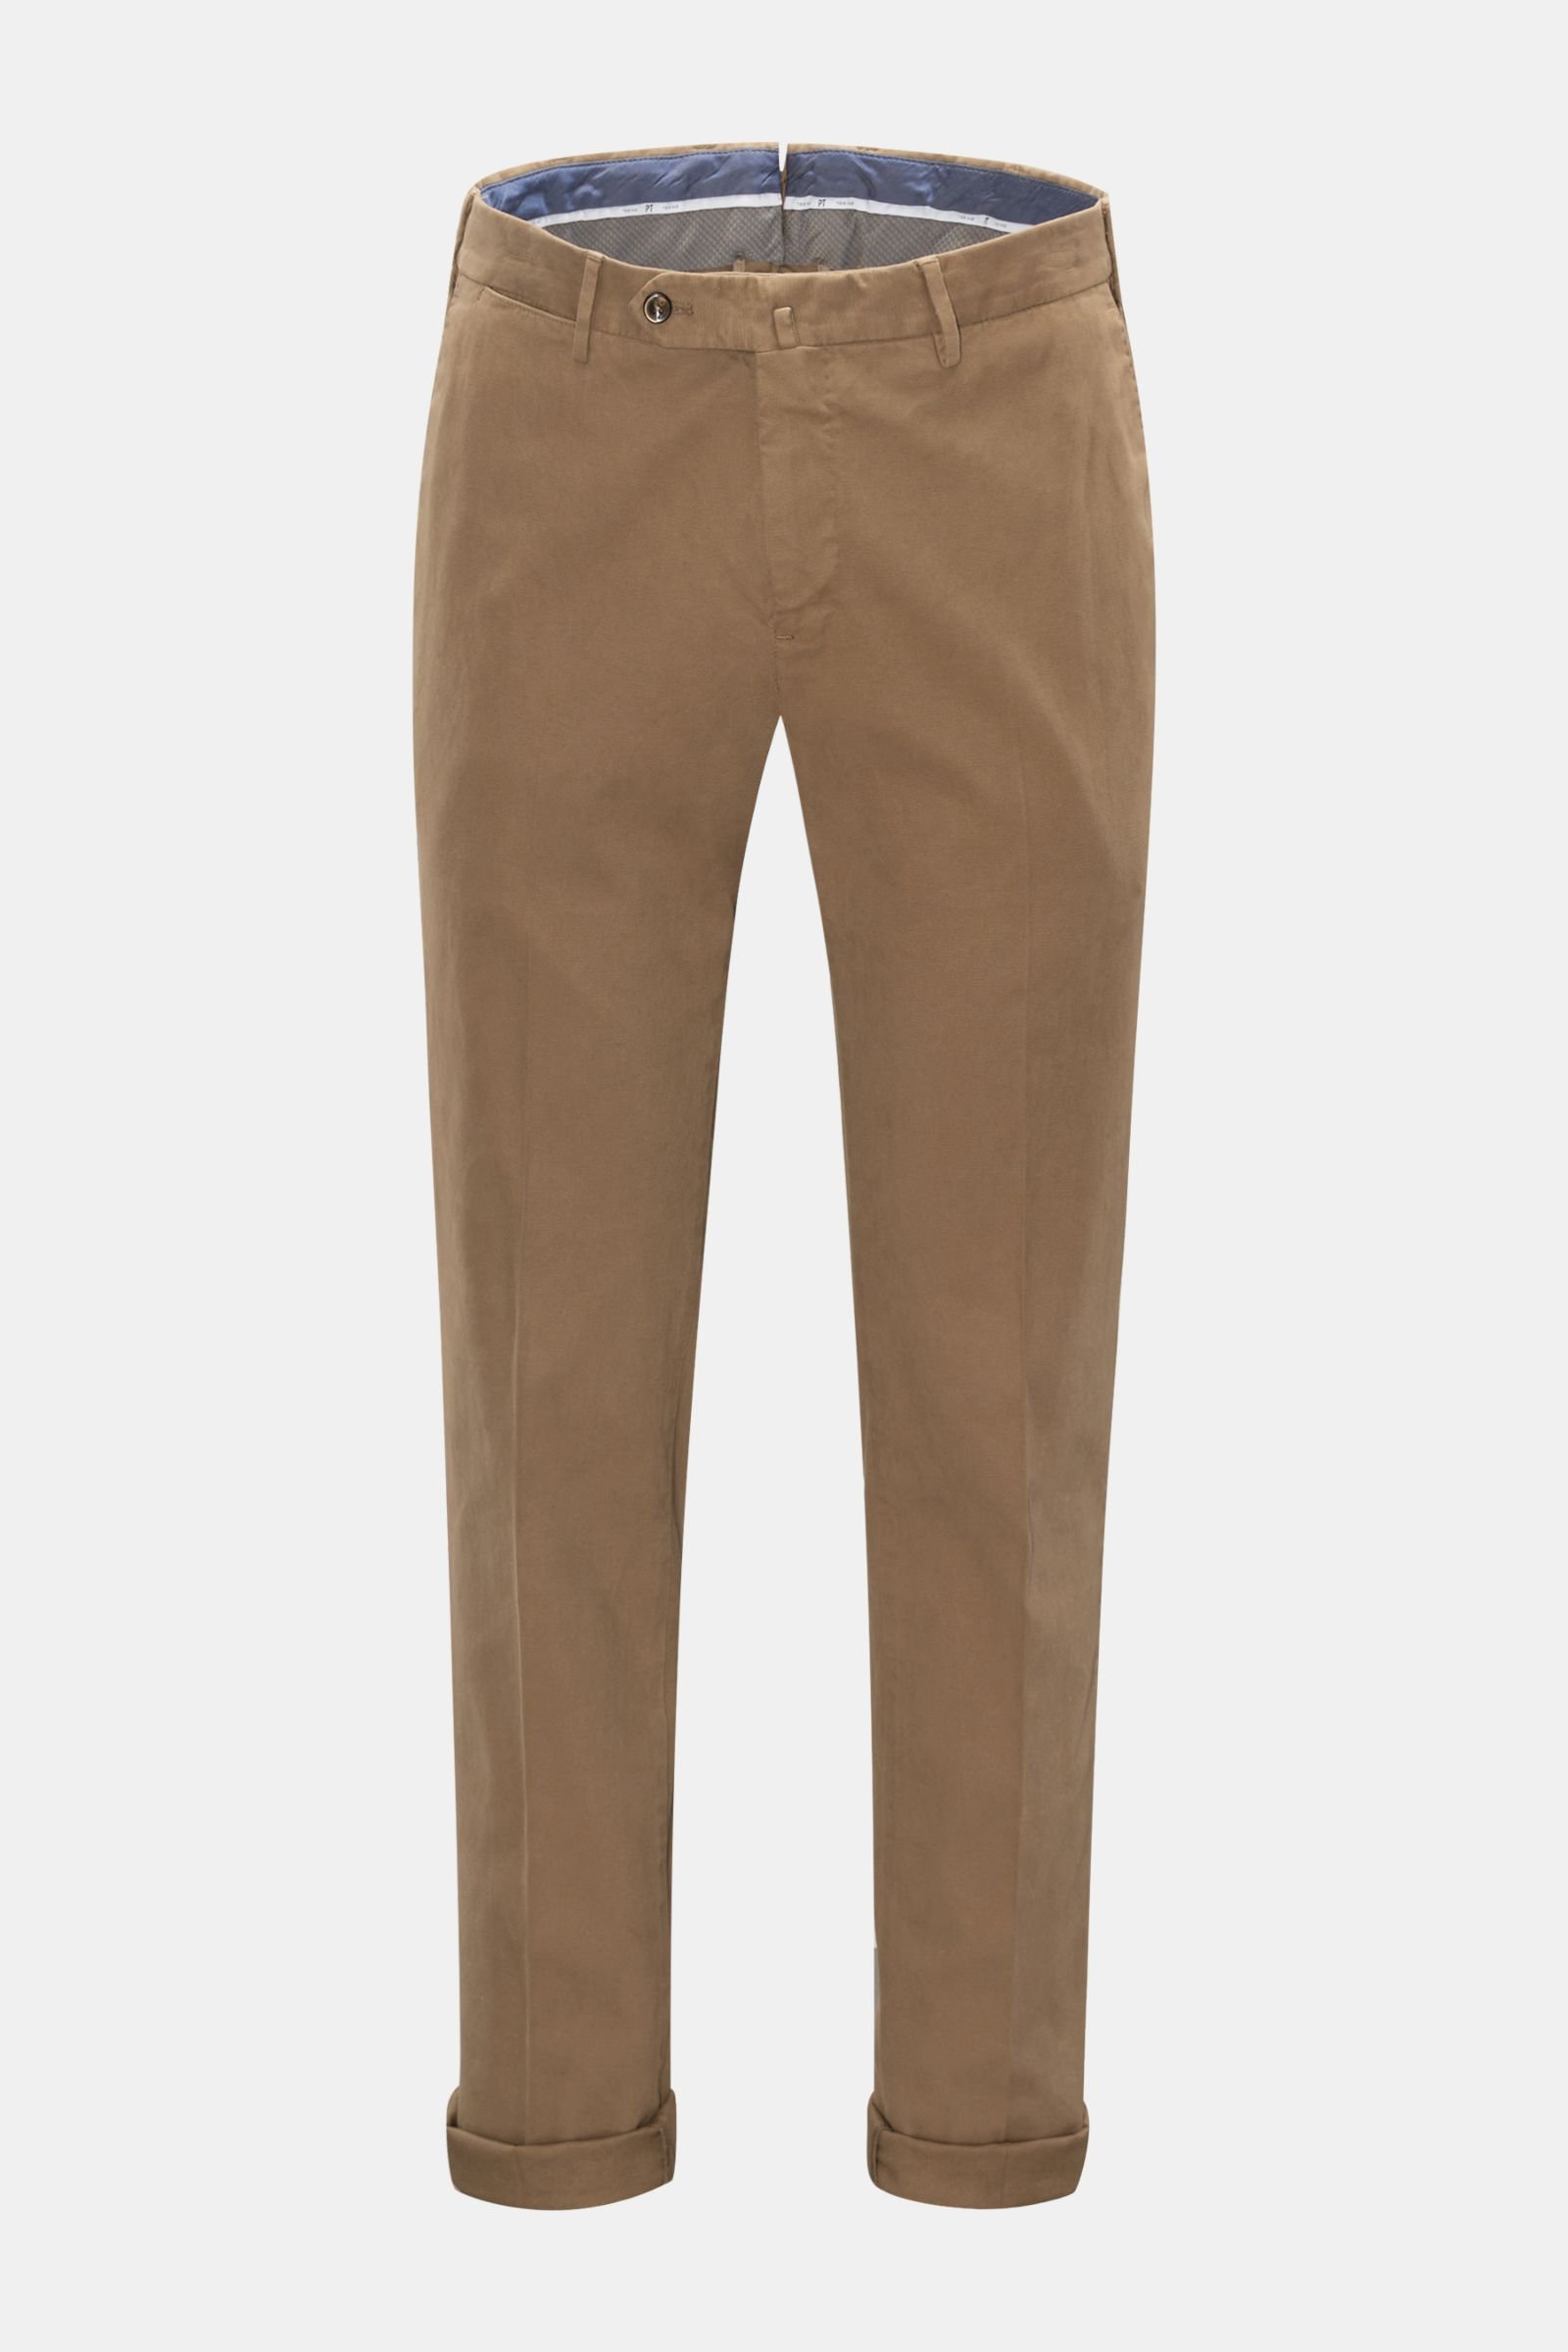 Cotton trousers 'Slim Fit' light brown